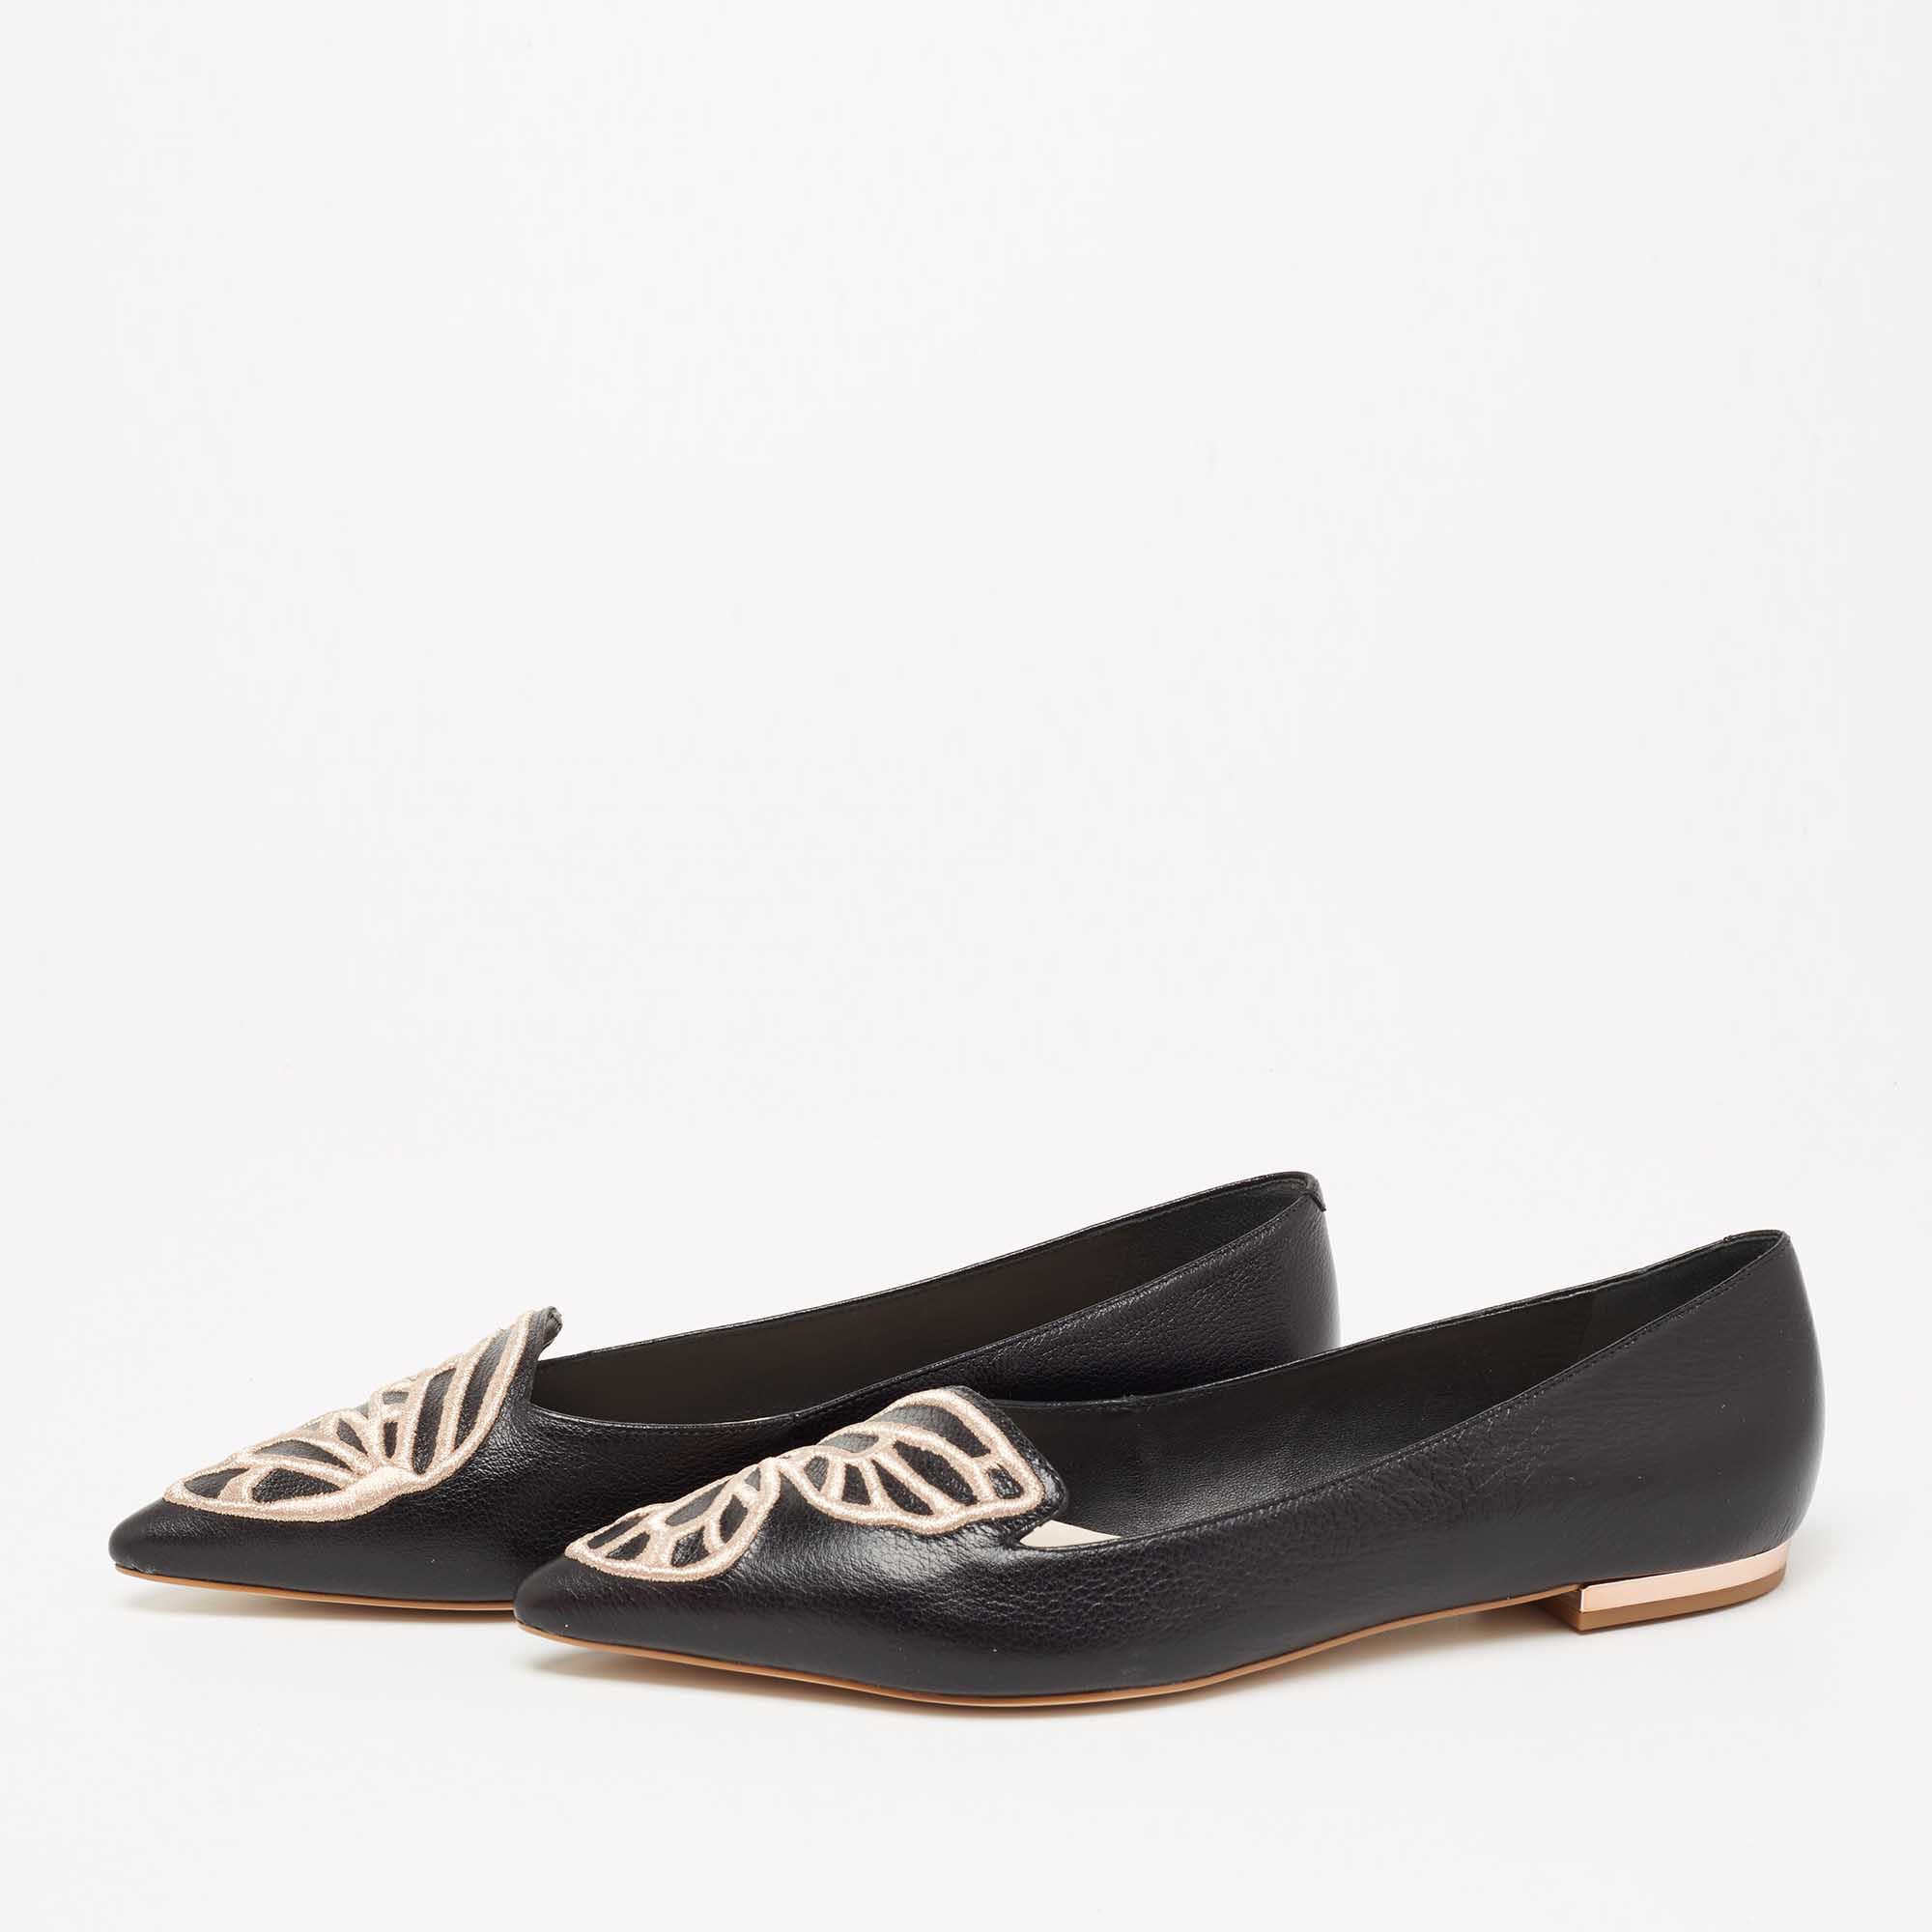 

Sophia Webster Black Leather Embroidered Bibi Butterfly Pointed-Toe Ballet Flats Size